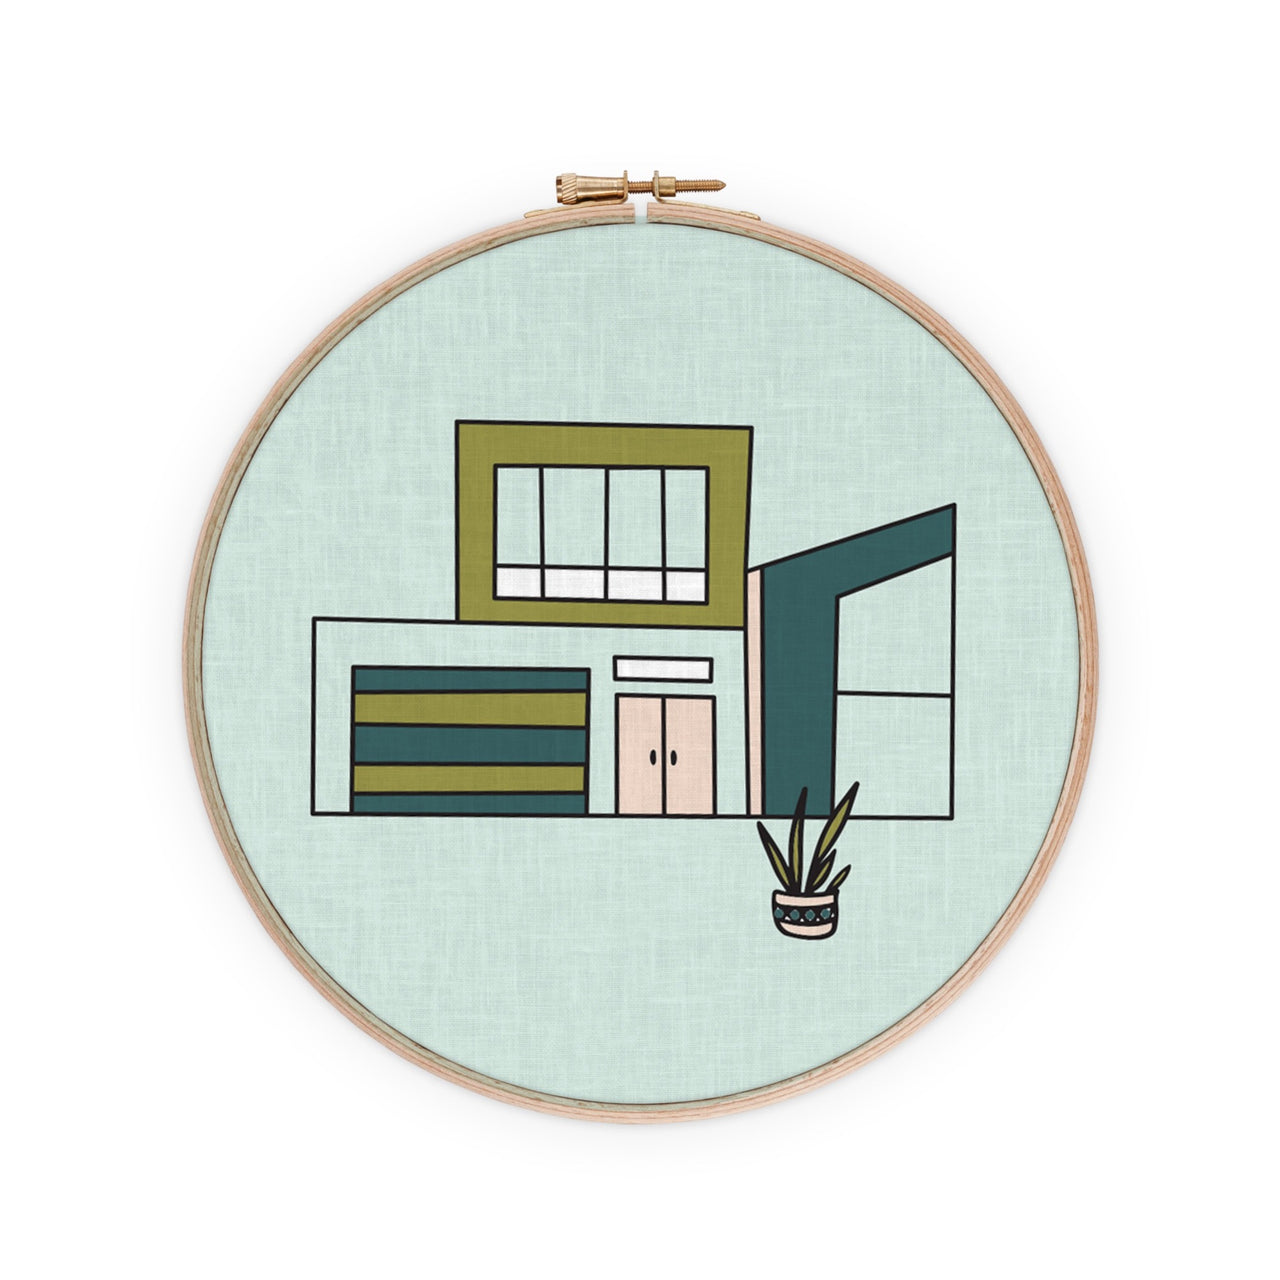 Sunny Southwest Postmodern House Embroidery Pattern PDF Download | Radiant Home Studio